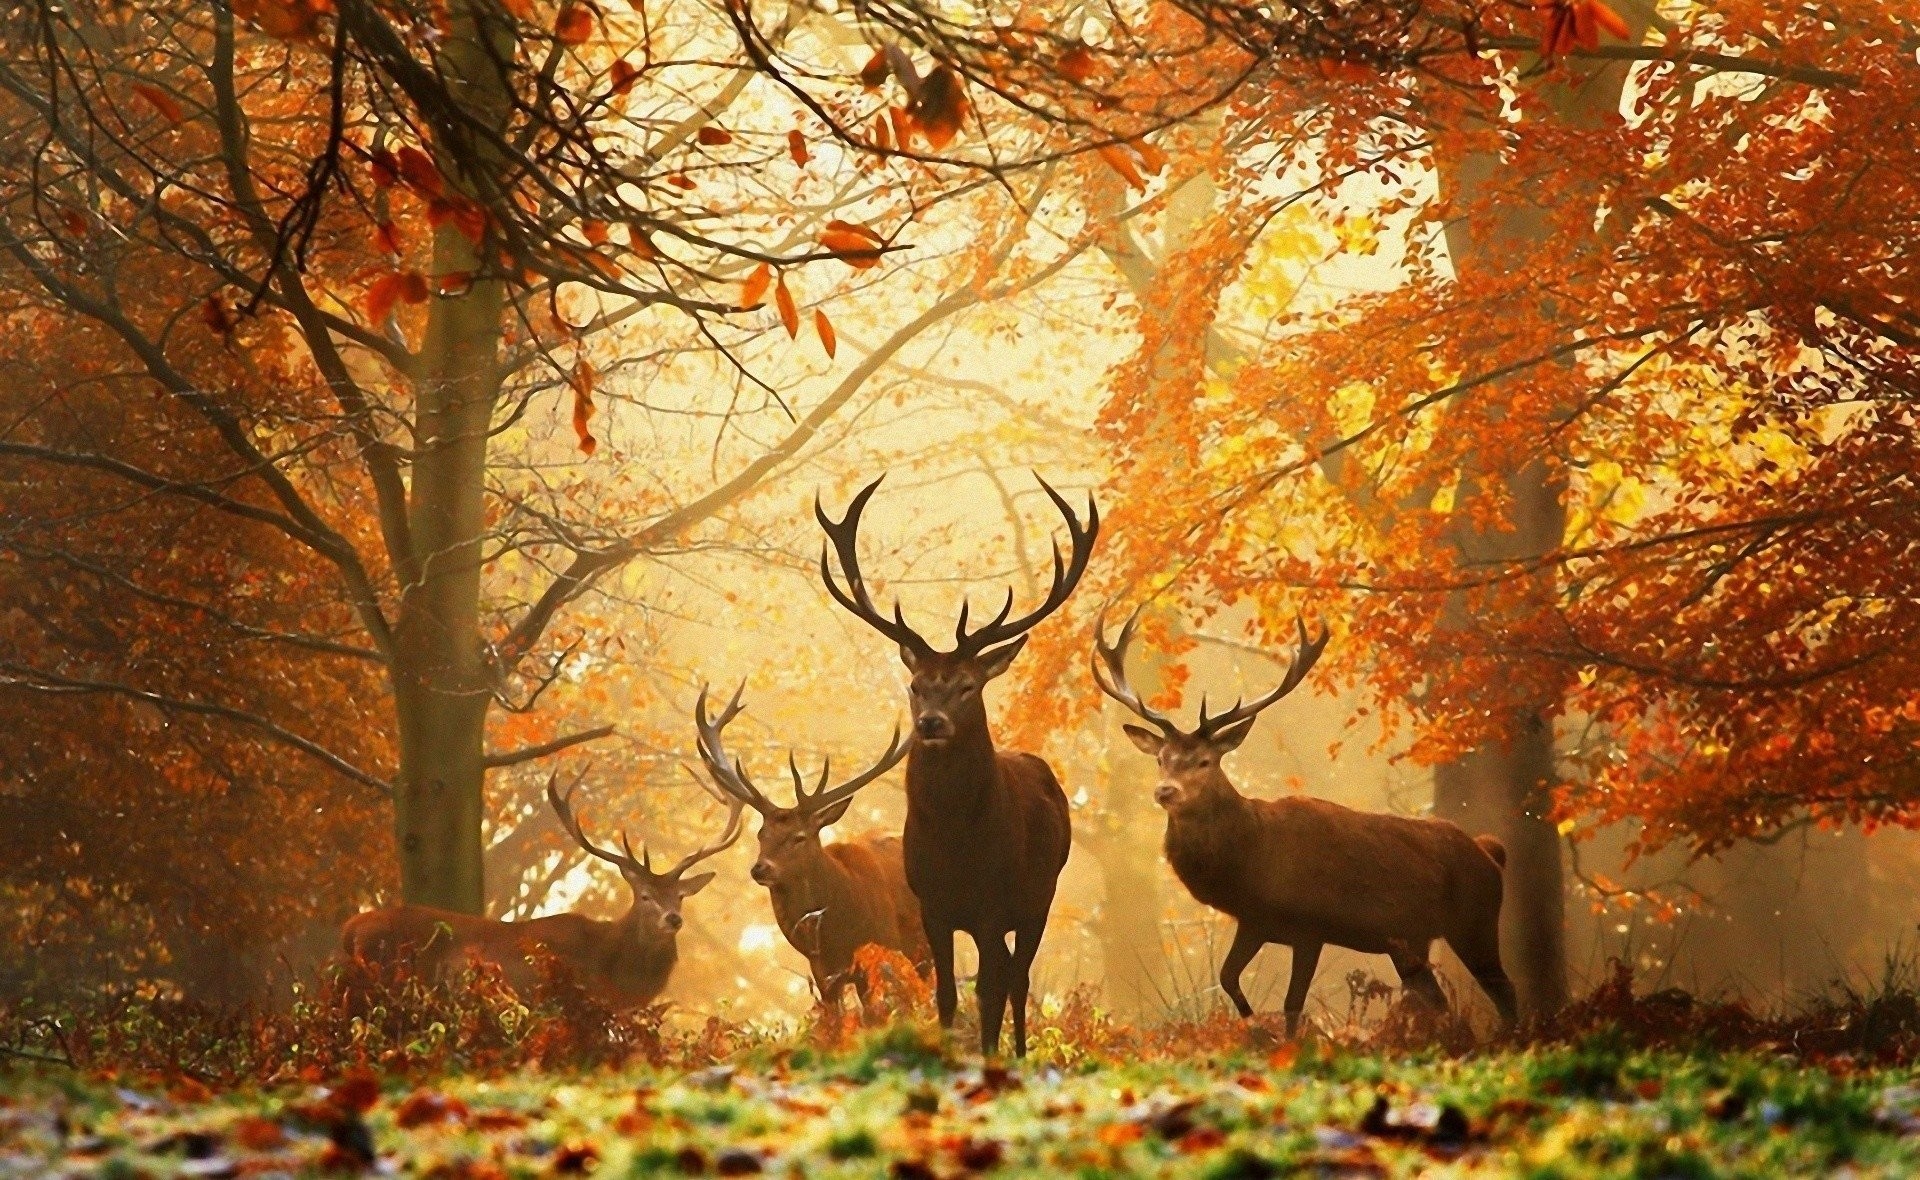 1920x1180 whitetail deer wallpaper free Android Apps on Google Play